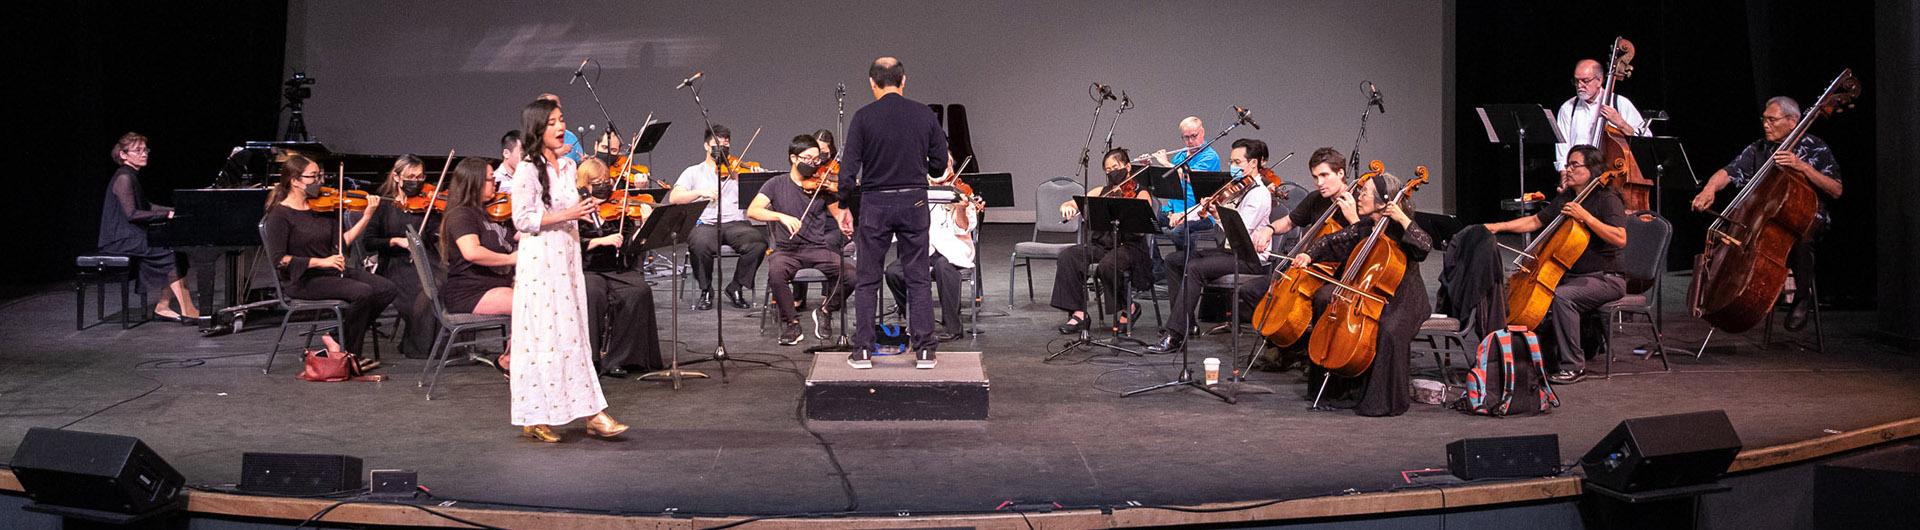 Sangeeta Kaur practices with orchestra before a concert